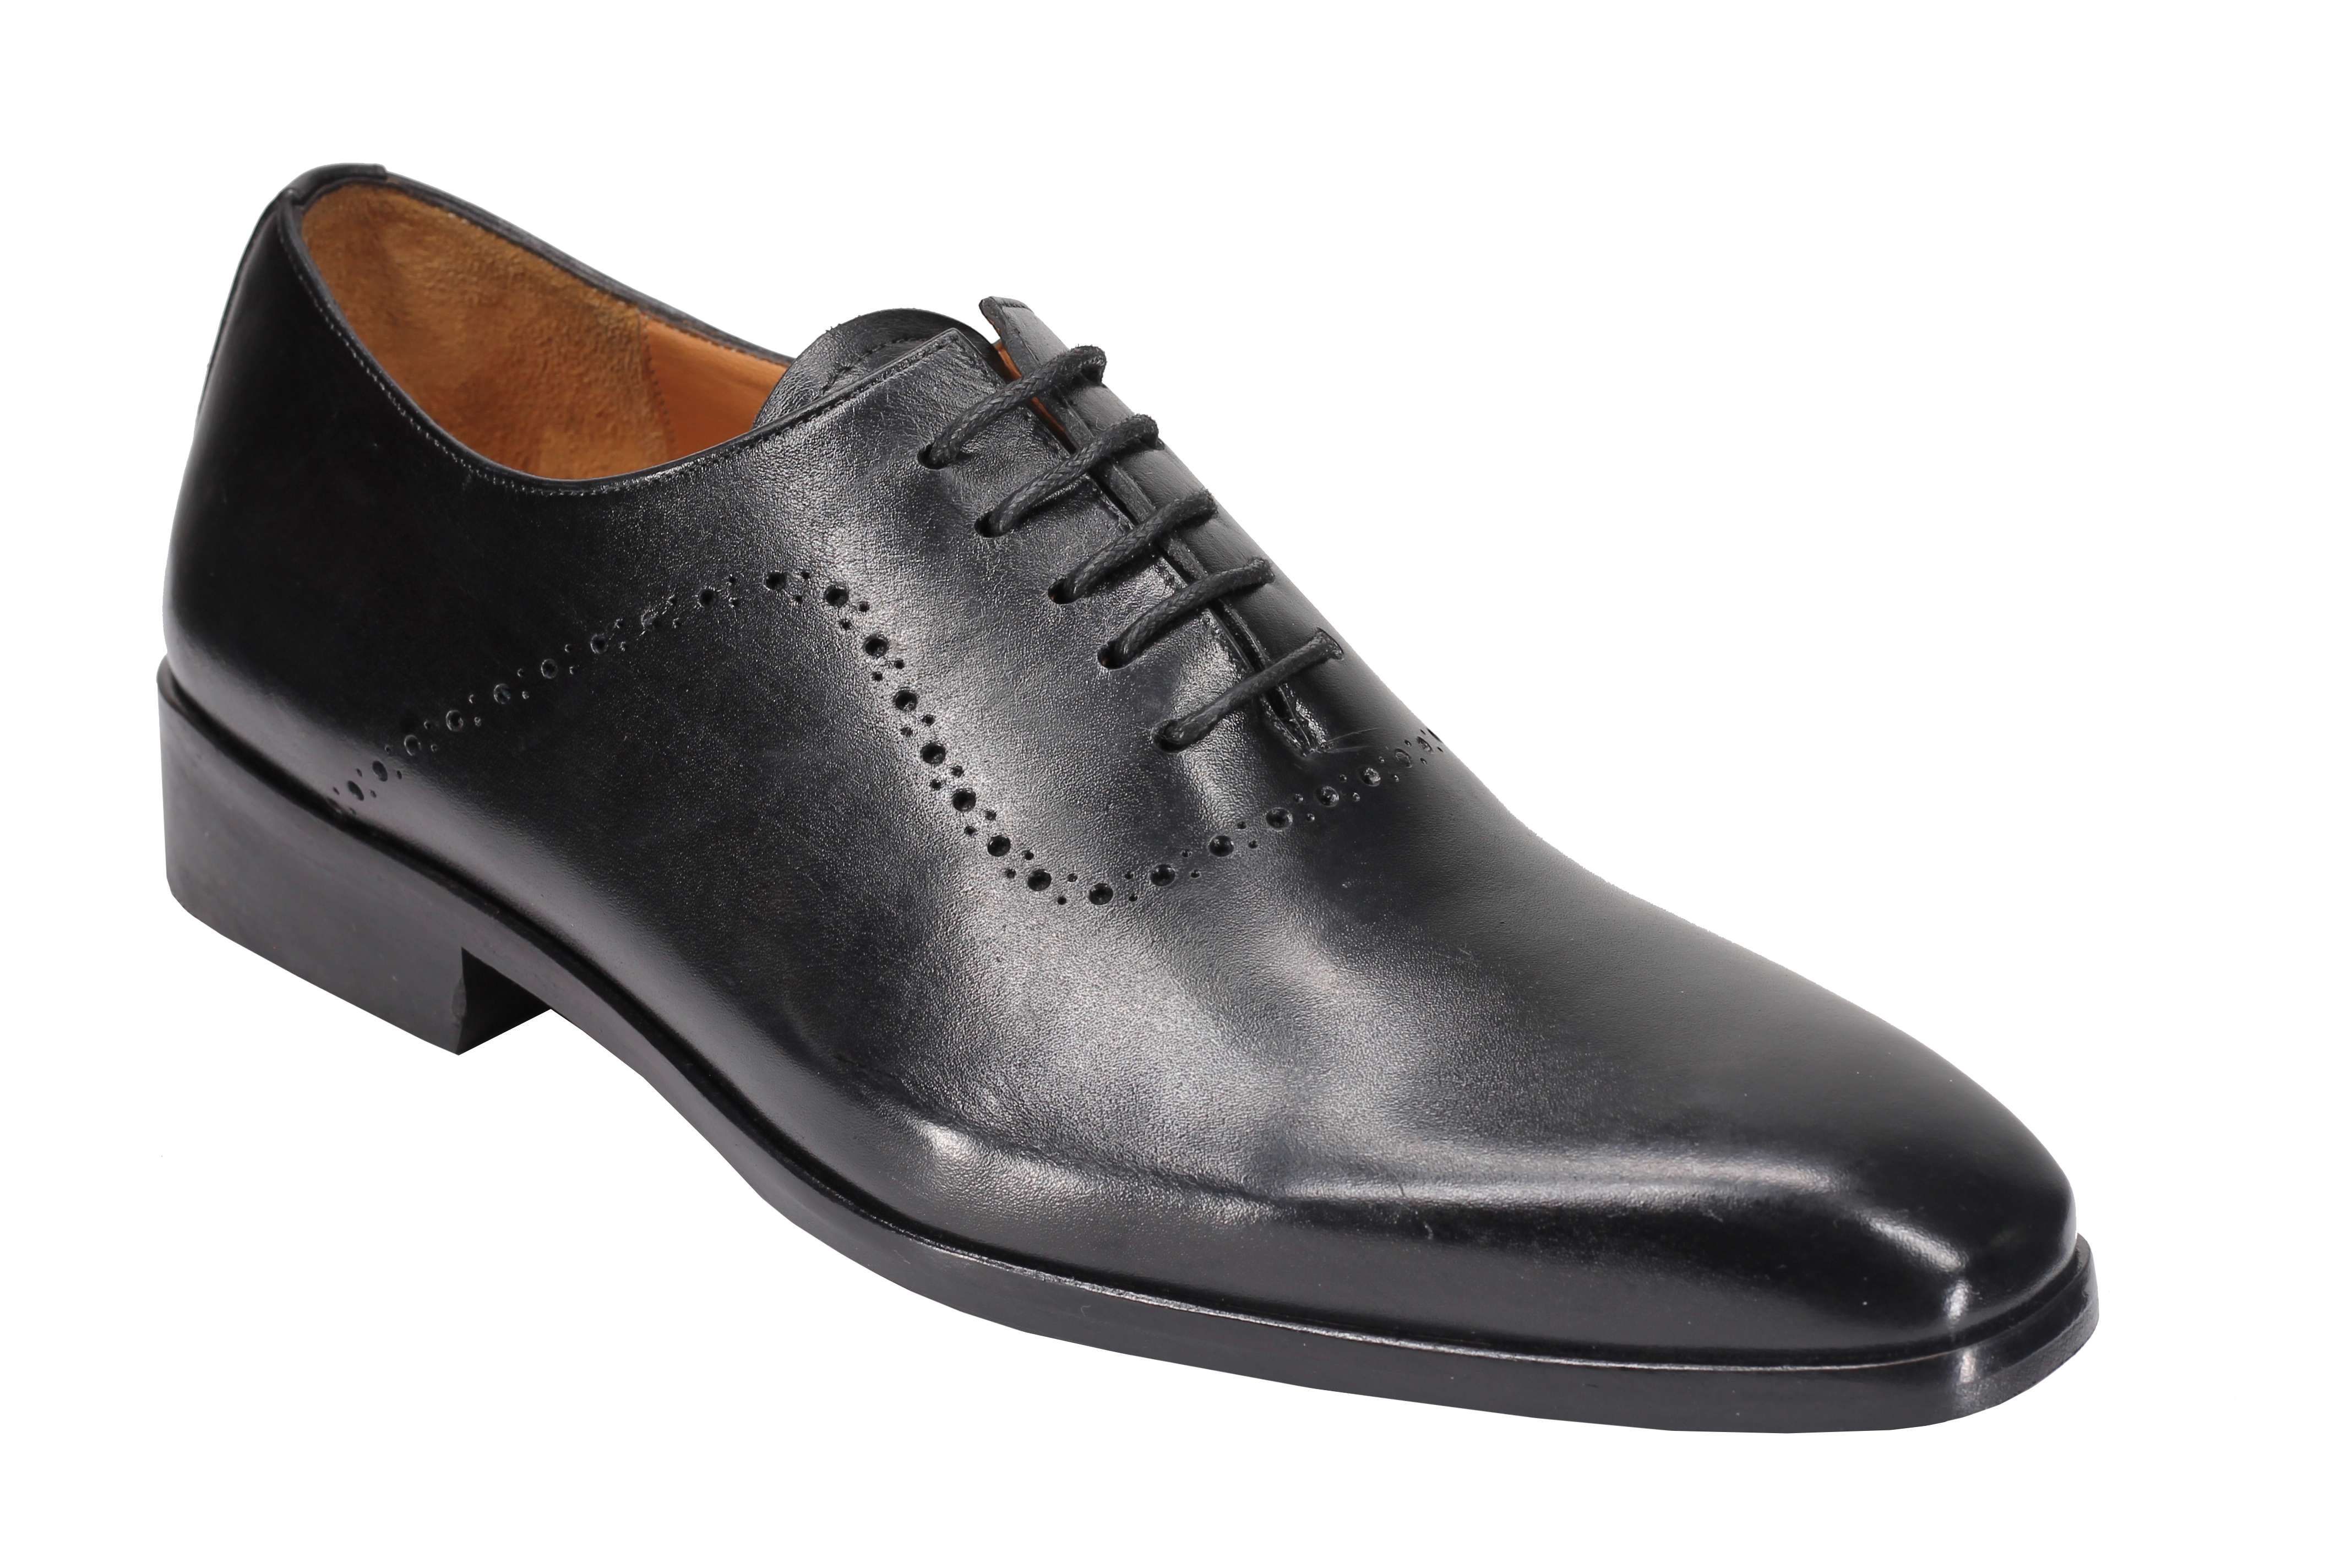 BLACK CALF LEATHER OXFORD LACE UP BROGUE SHOES